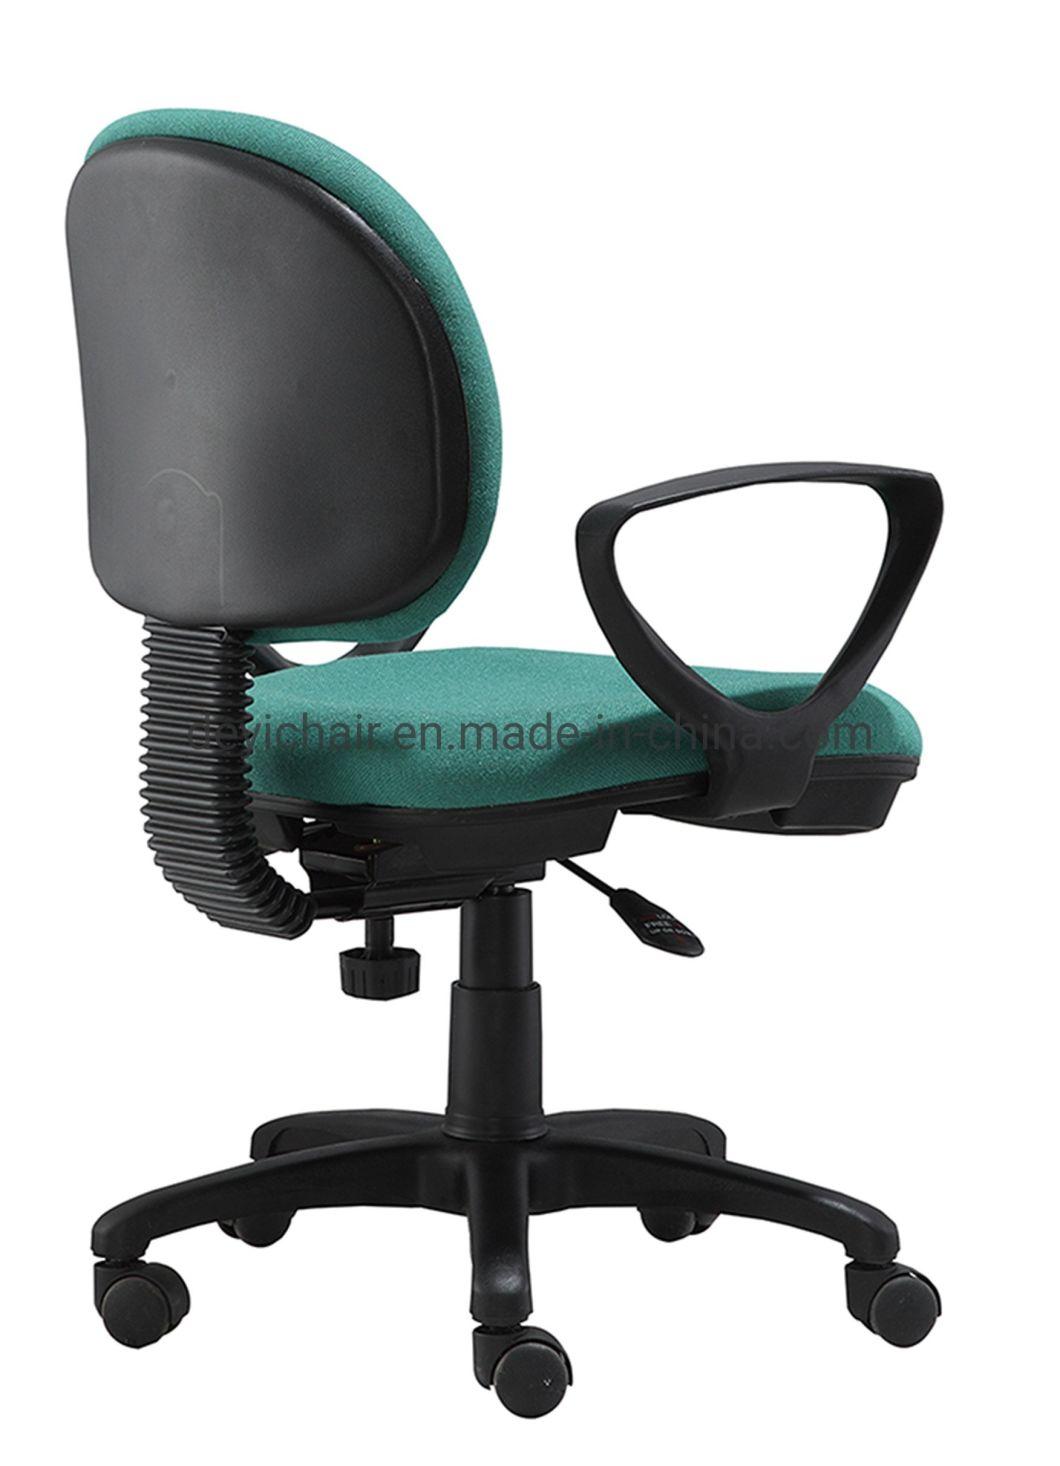 Simple Tilting Mechanism with PP Armrest Small Back B300mm Nylon Base Green Color Office Chair